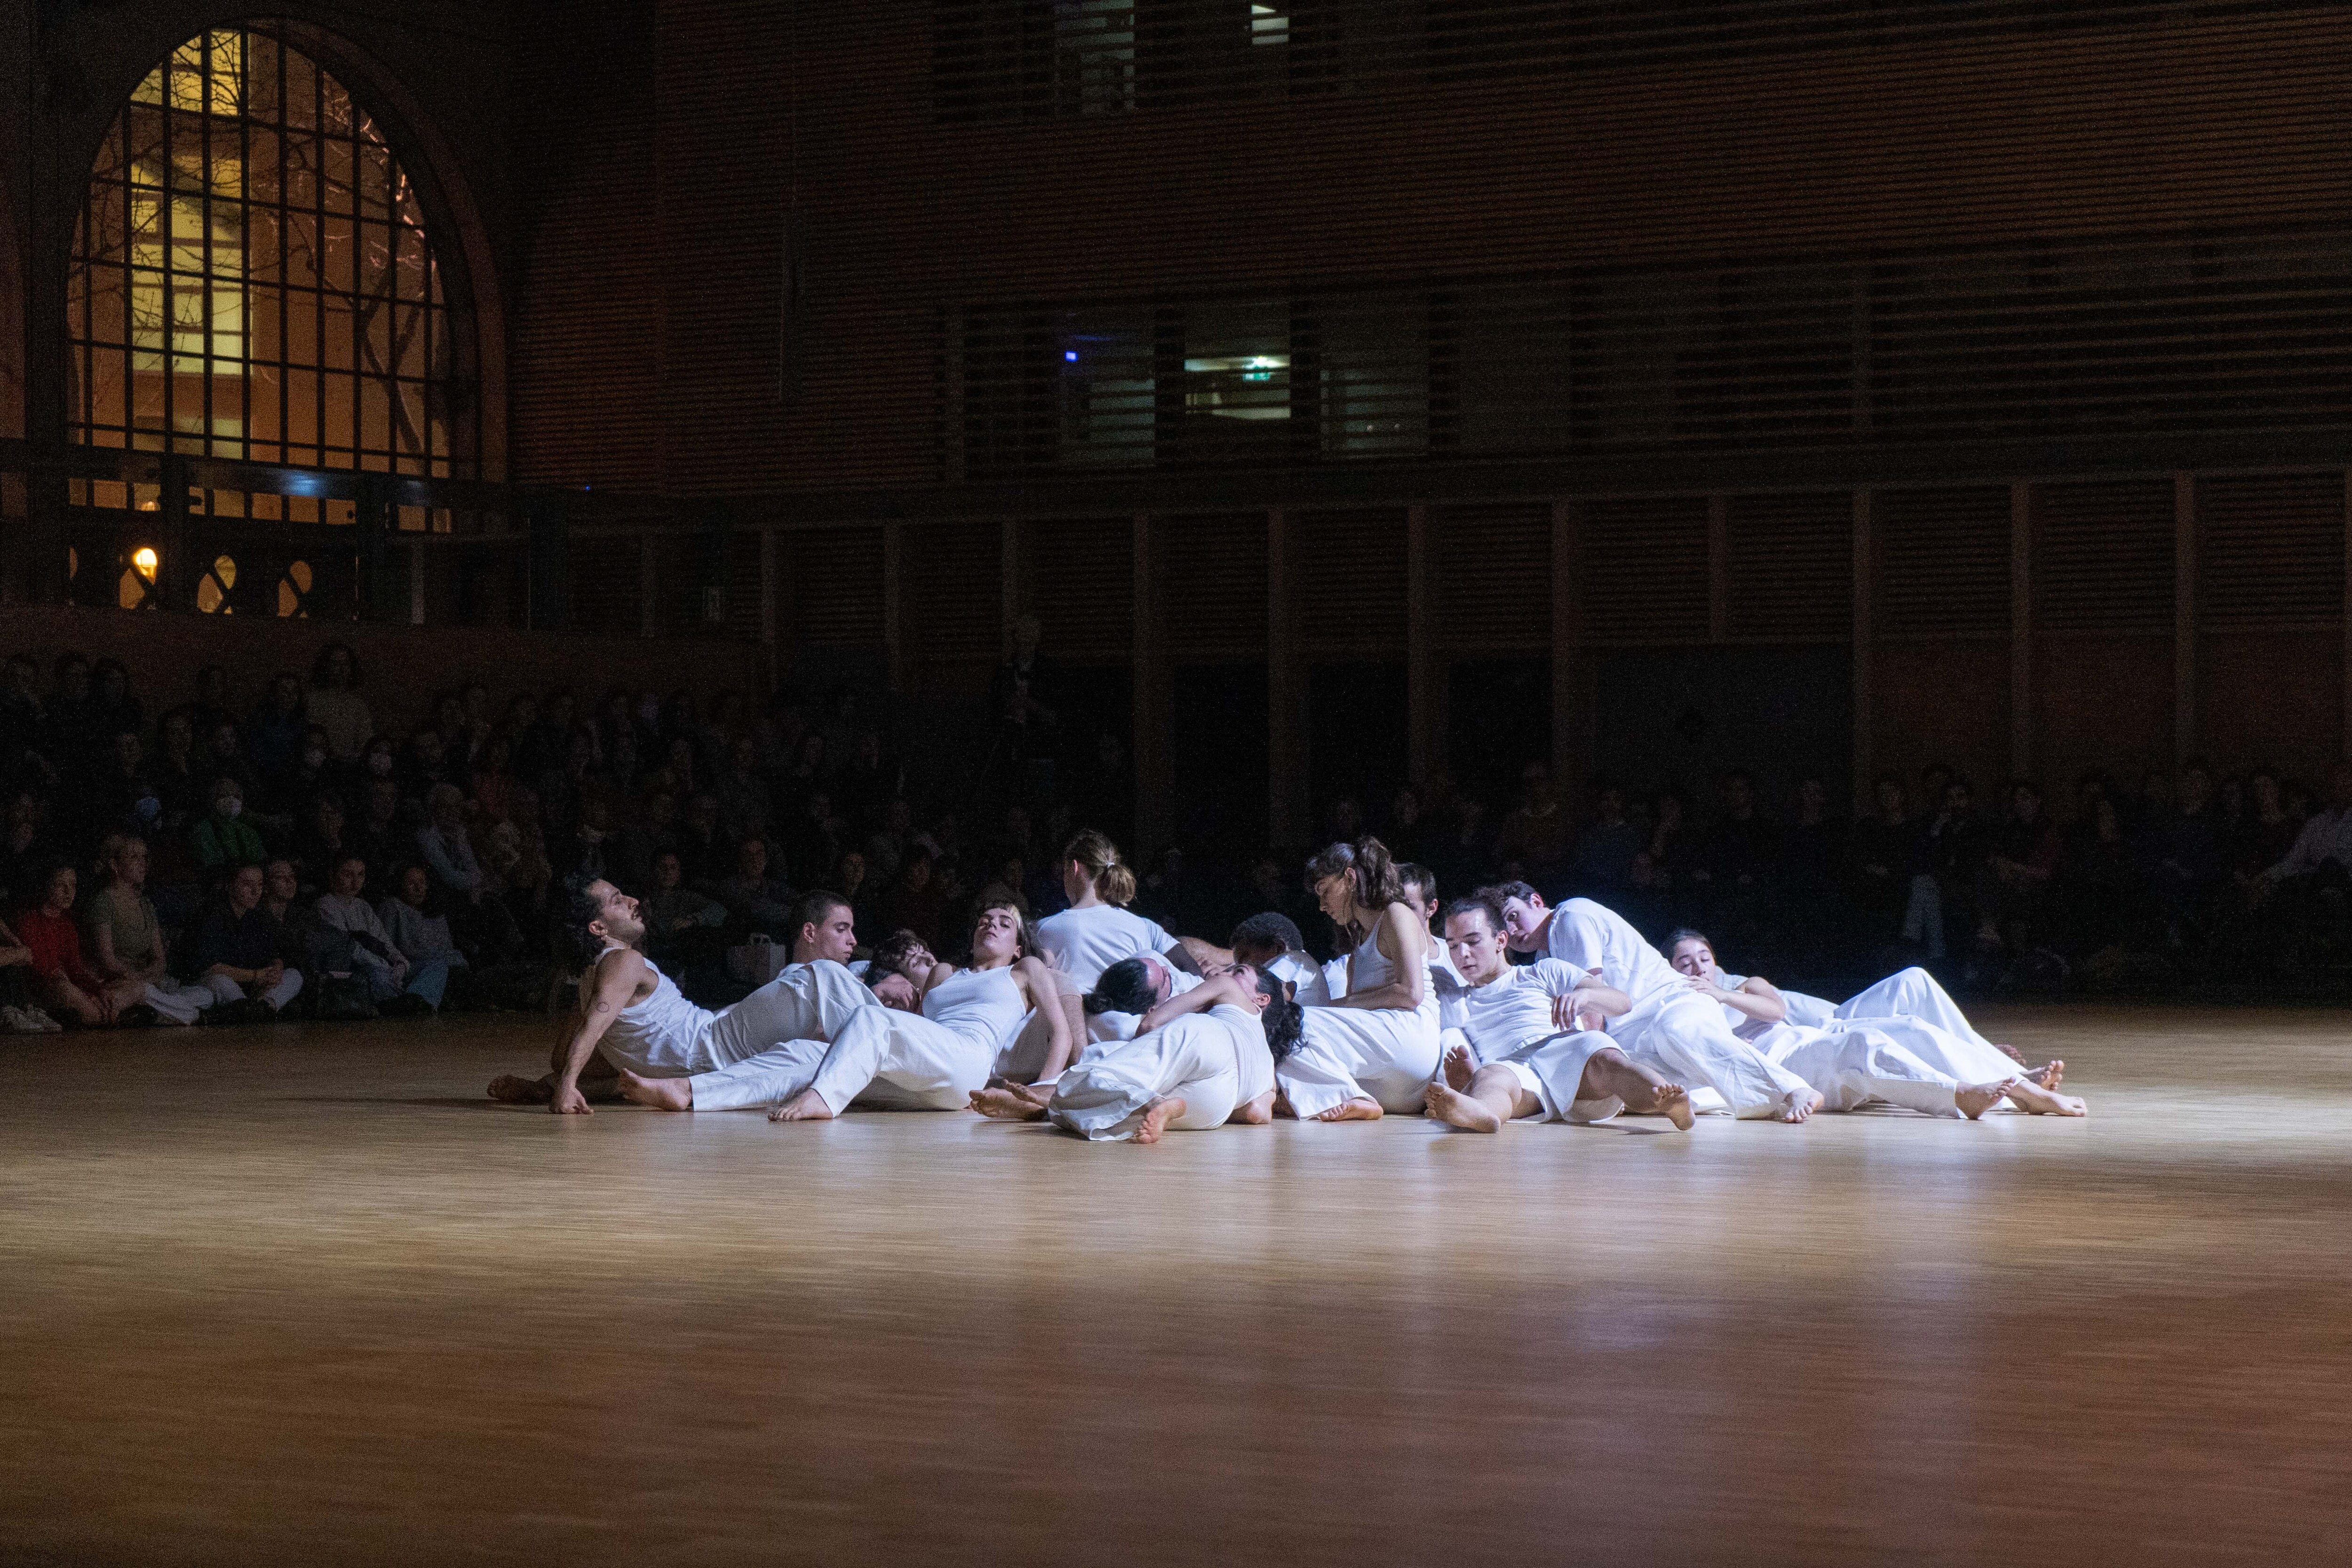 Dancers grouped on the floor